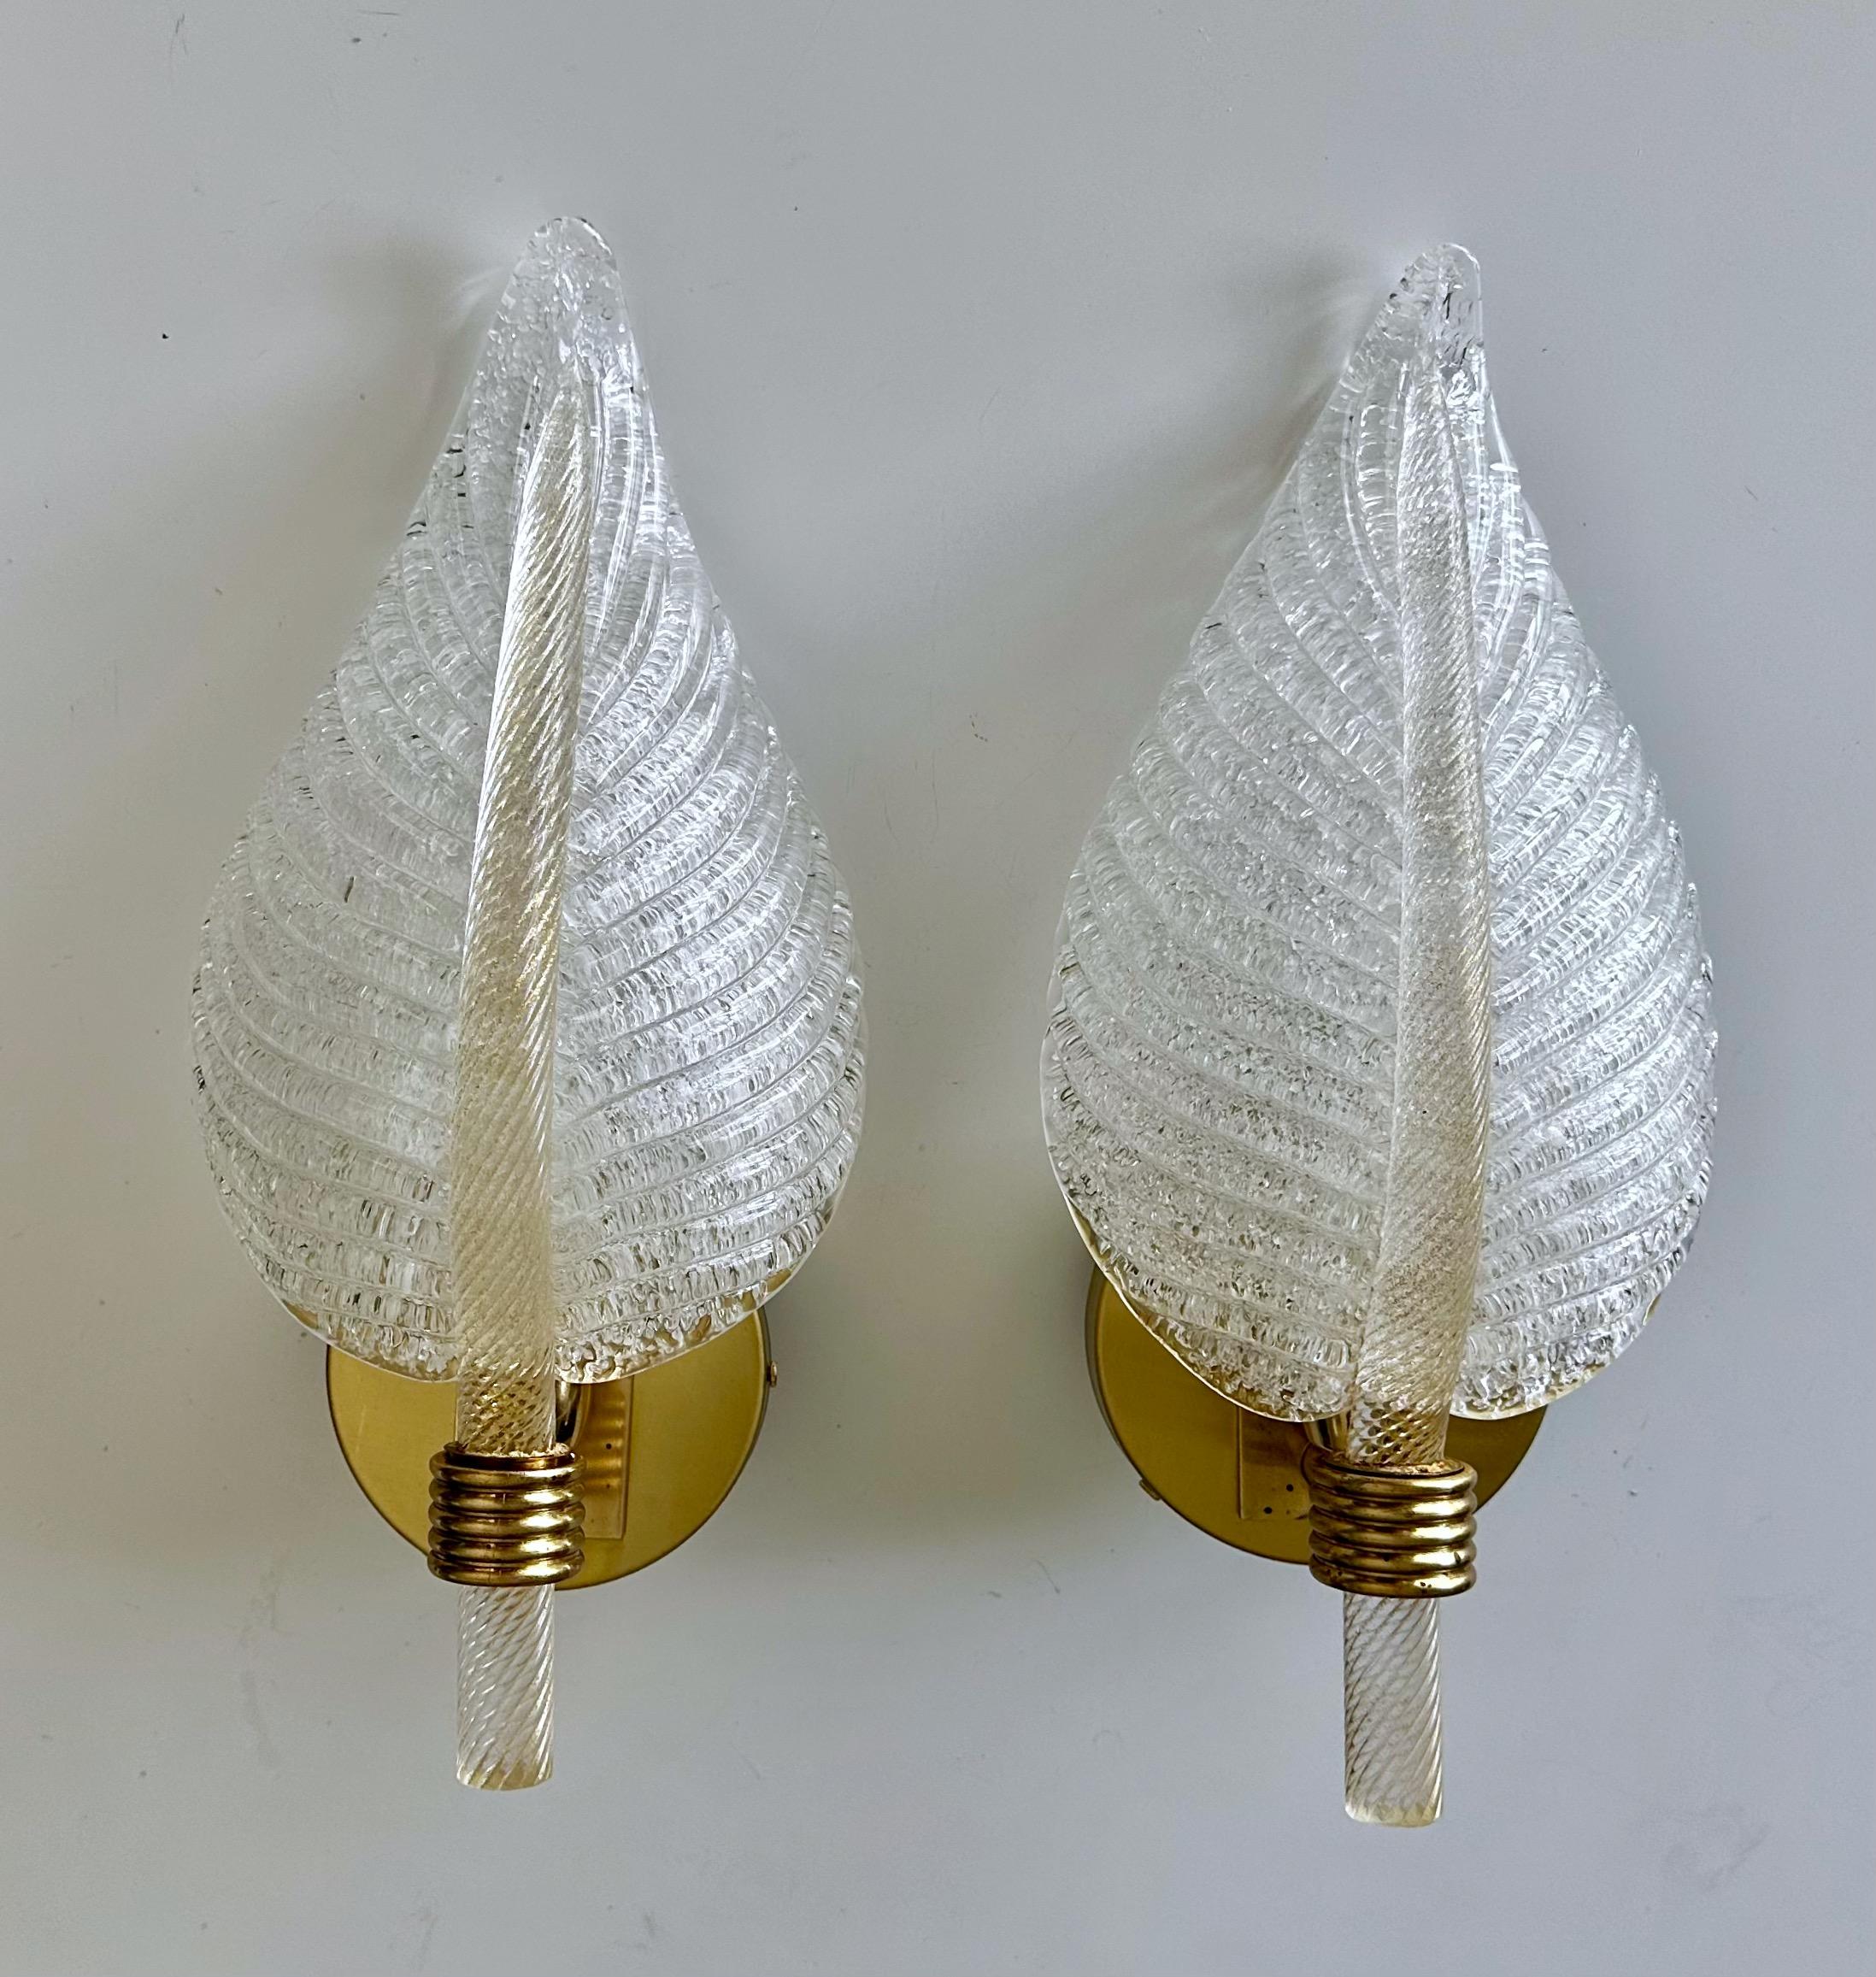 Pair of Murano hand blown glass wall sconces in leaf shape form, manufactured by Barovier & Toso in the early 1950s. Finely twisted glass stem infused with gold flecks and the reverse side of the leaf in the 